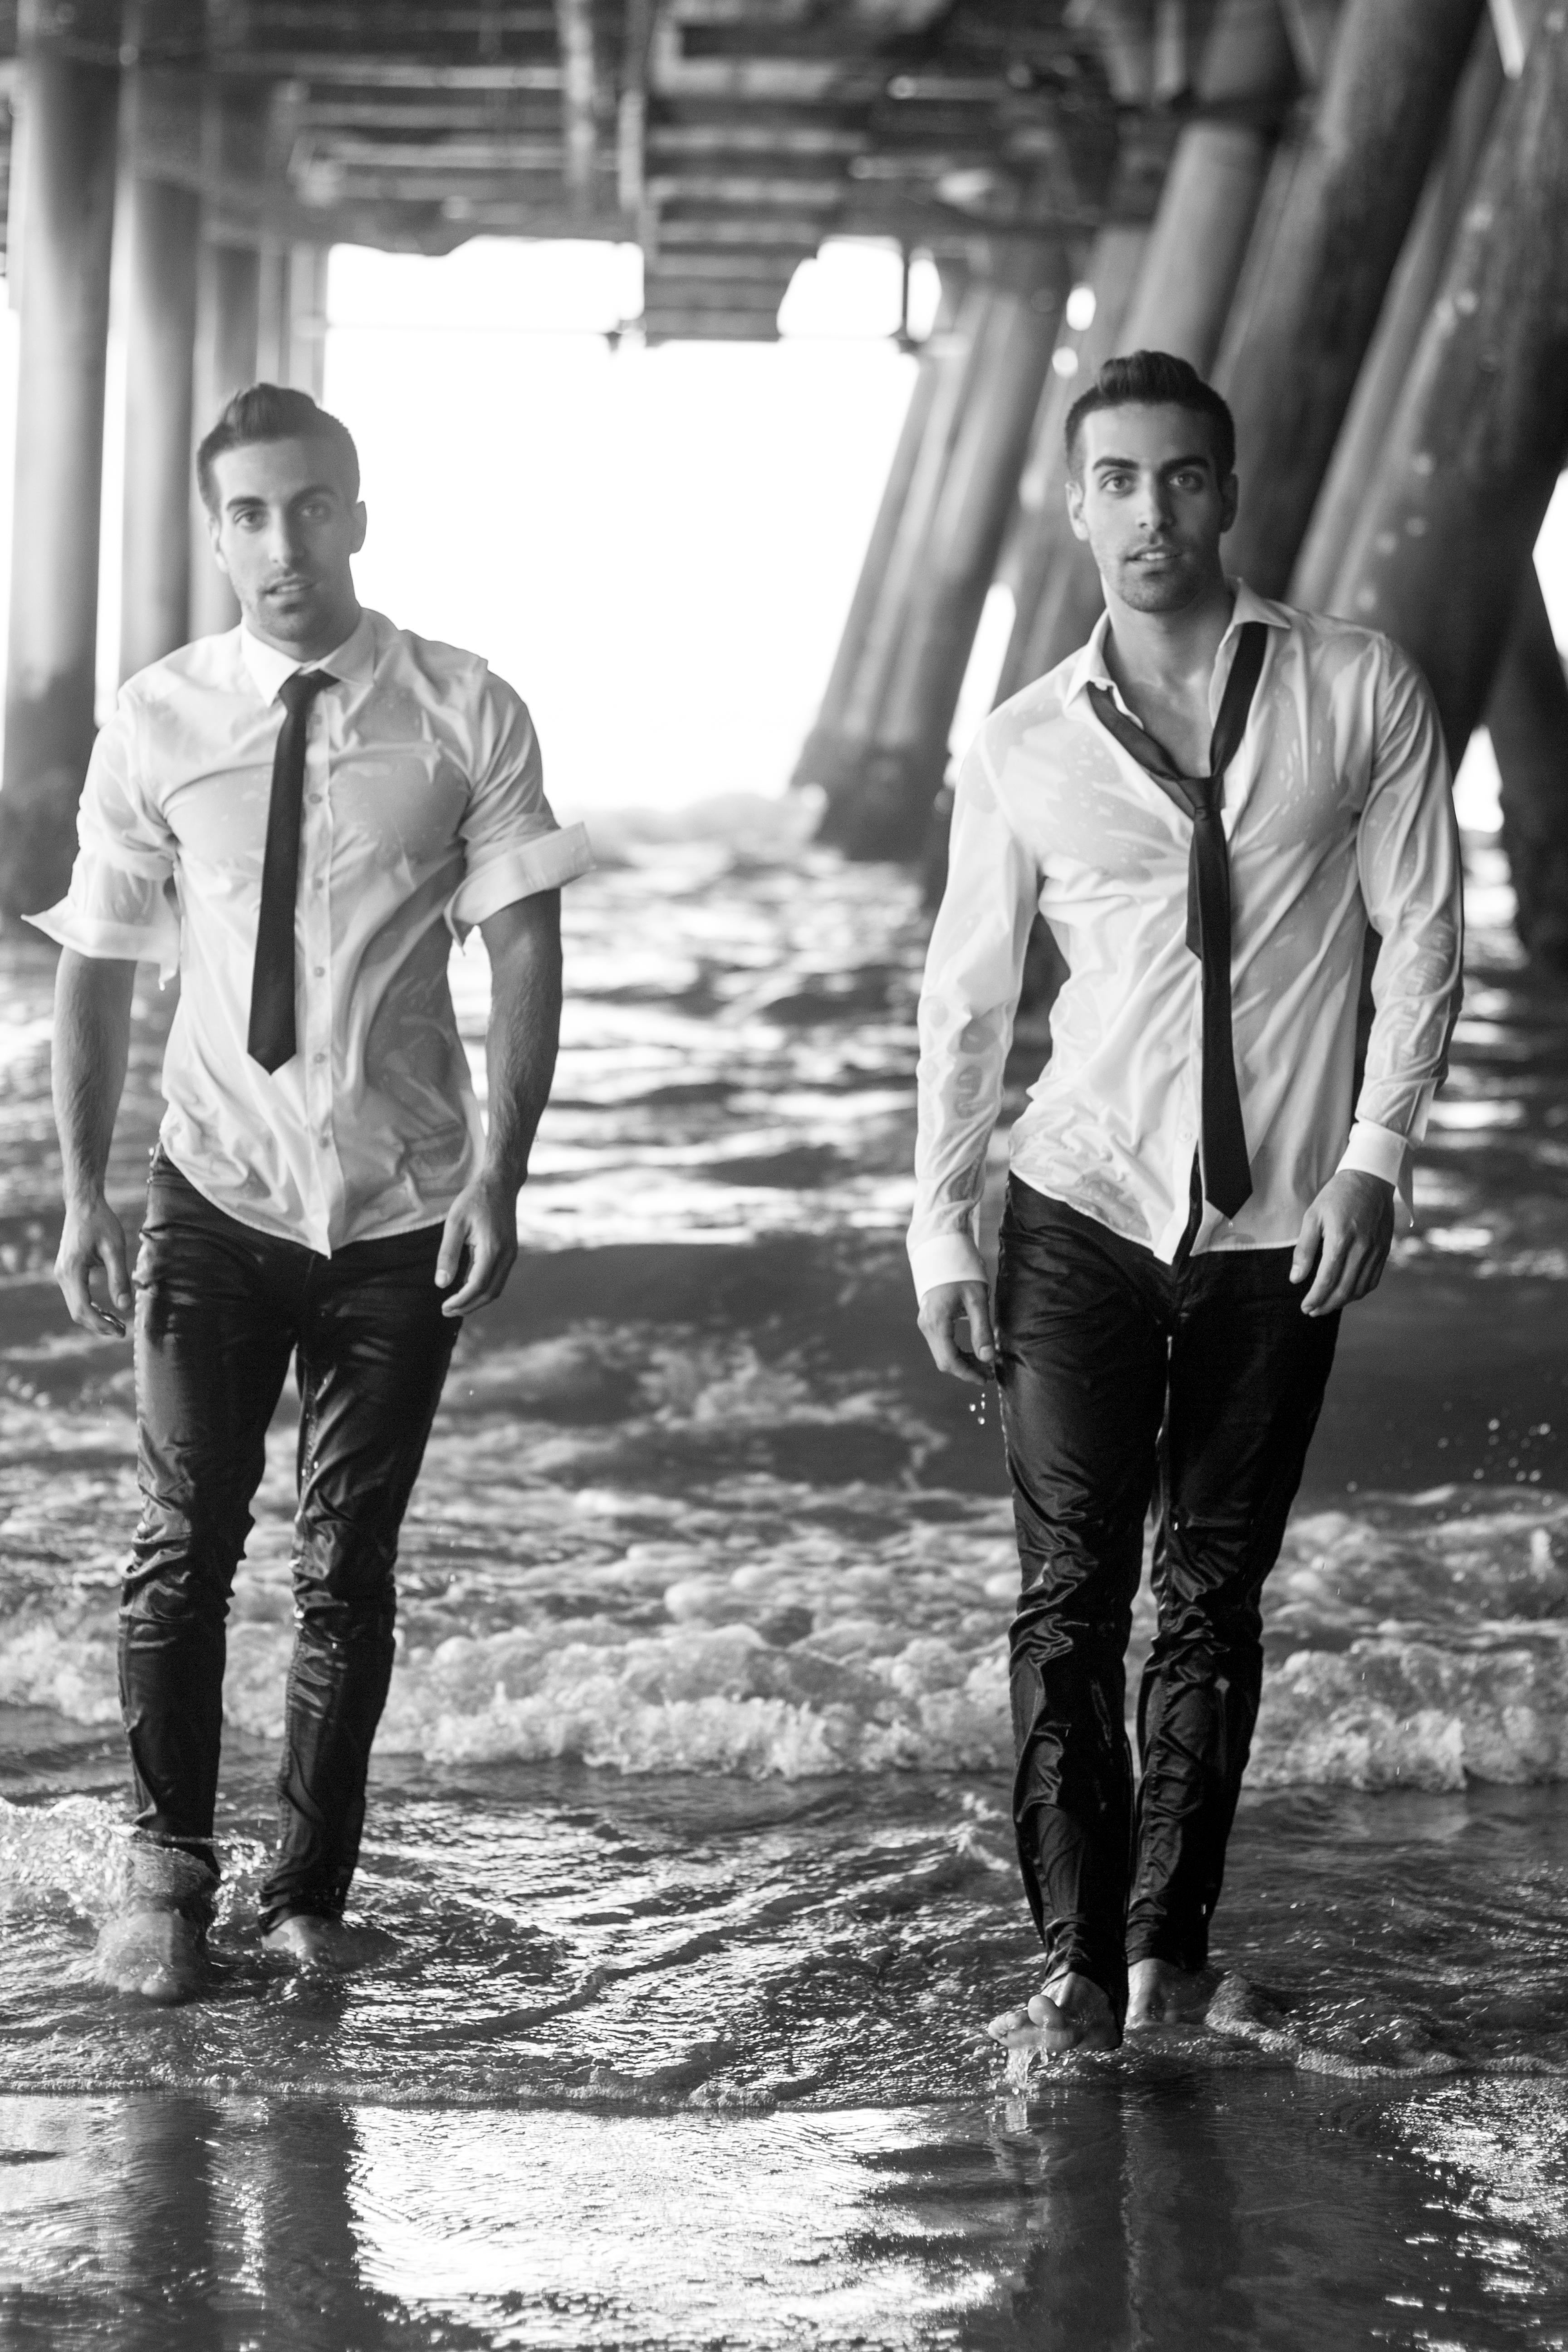 Dotan Ryder (Right) & identical twin brother Aidan Ryder (Left)